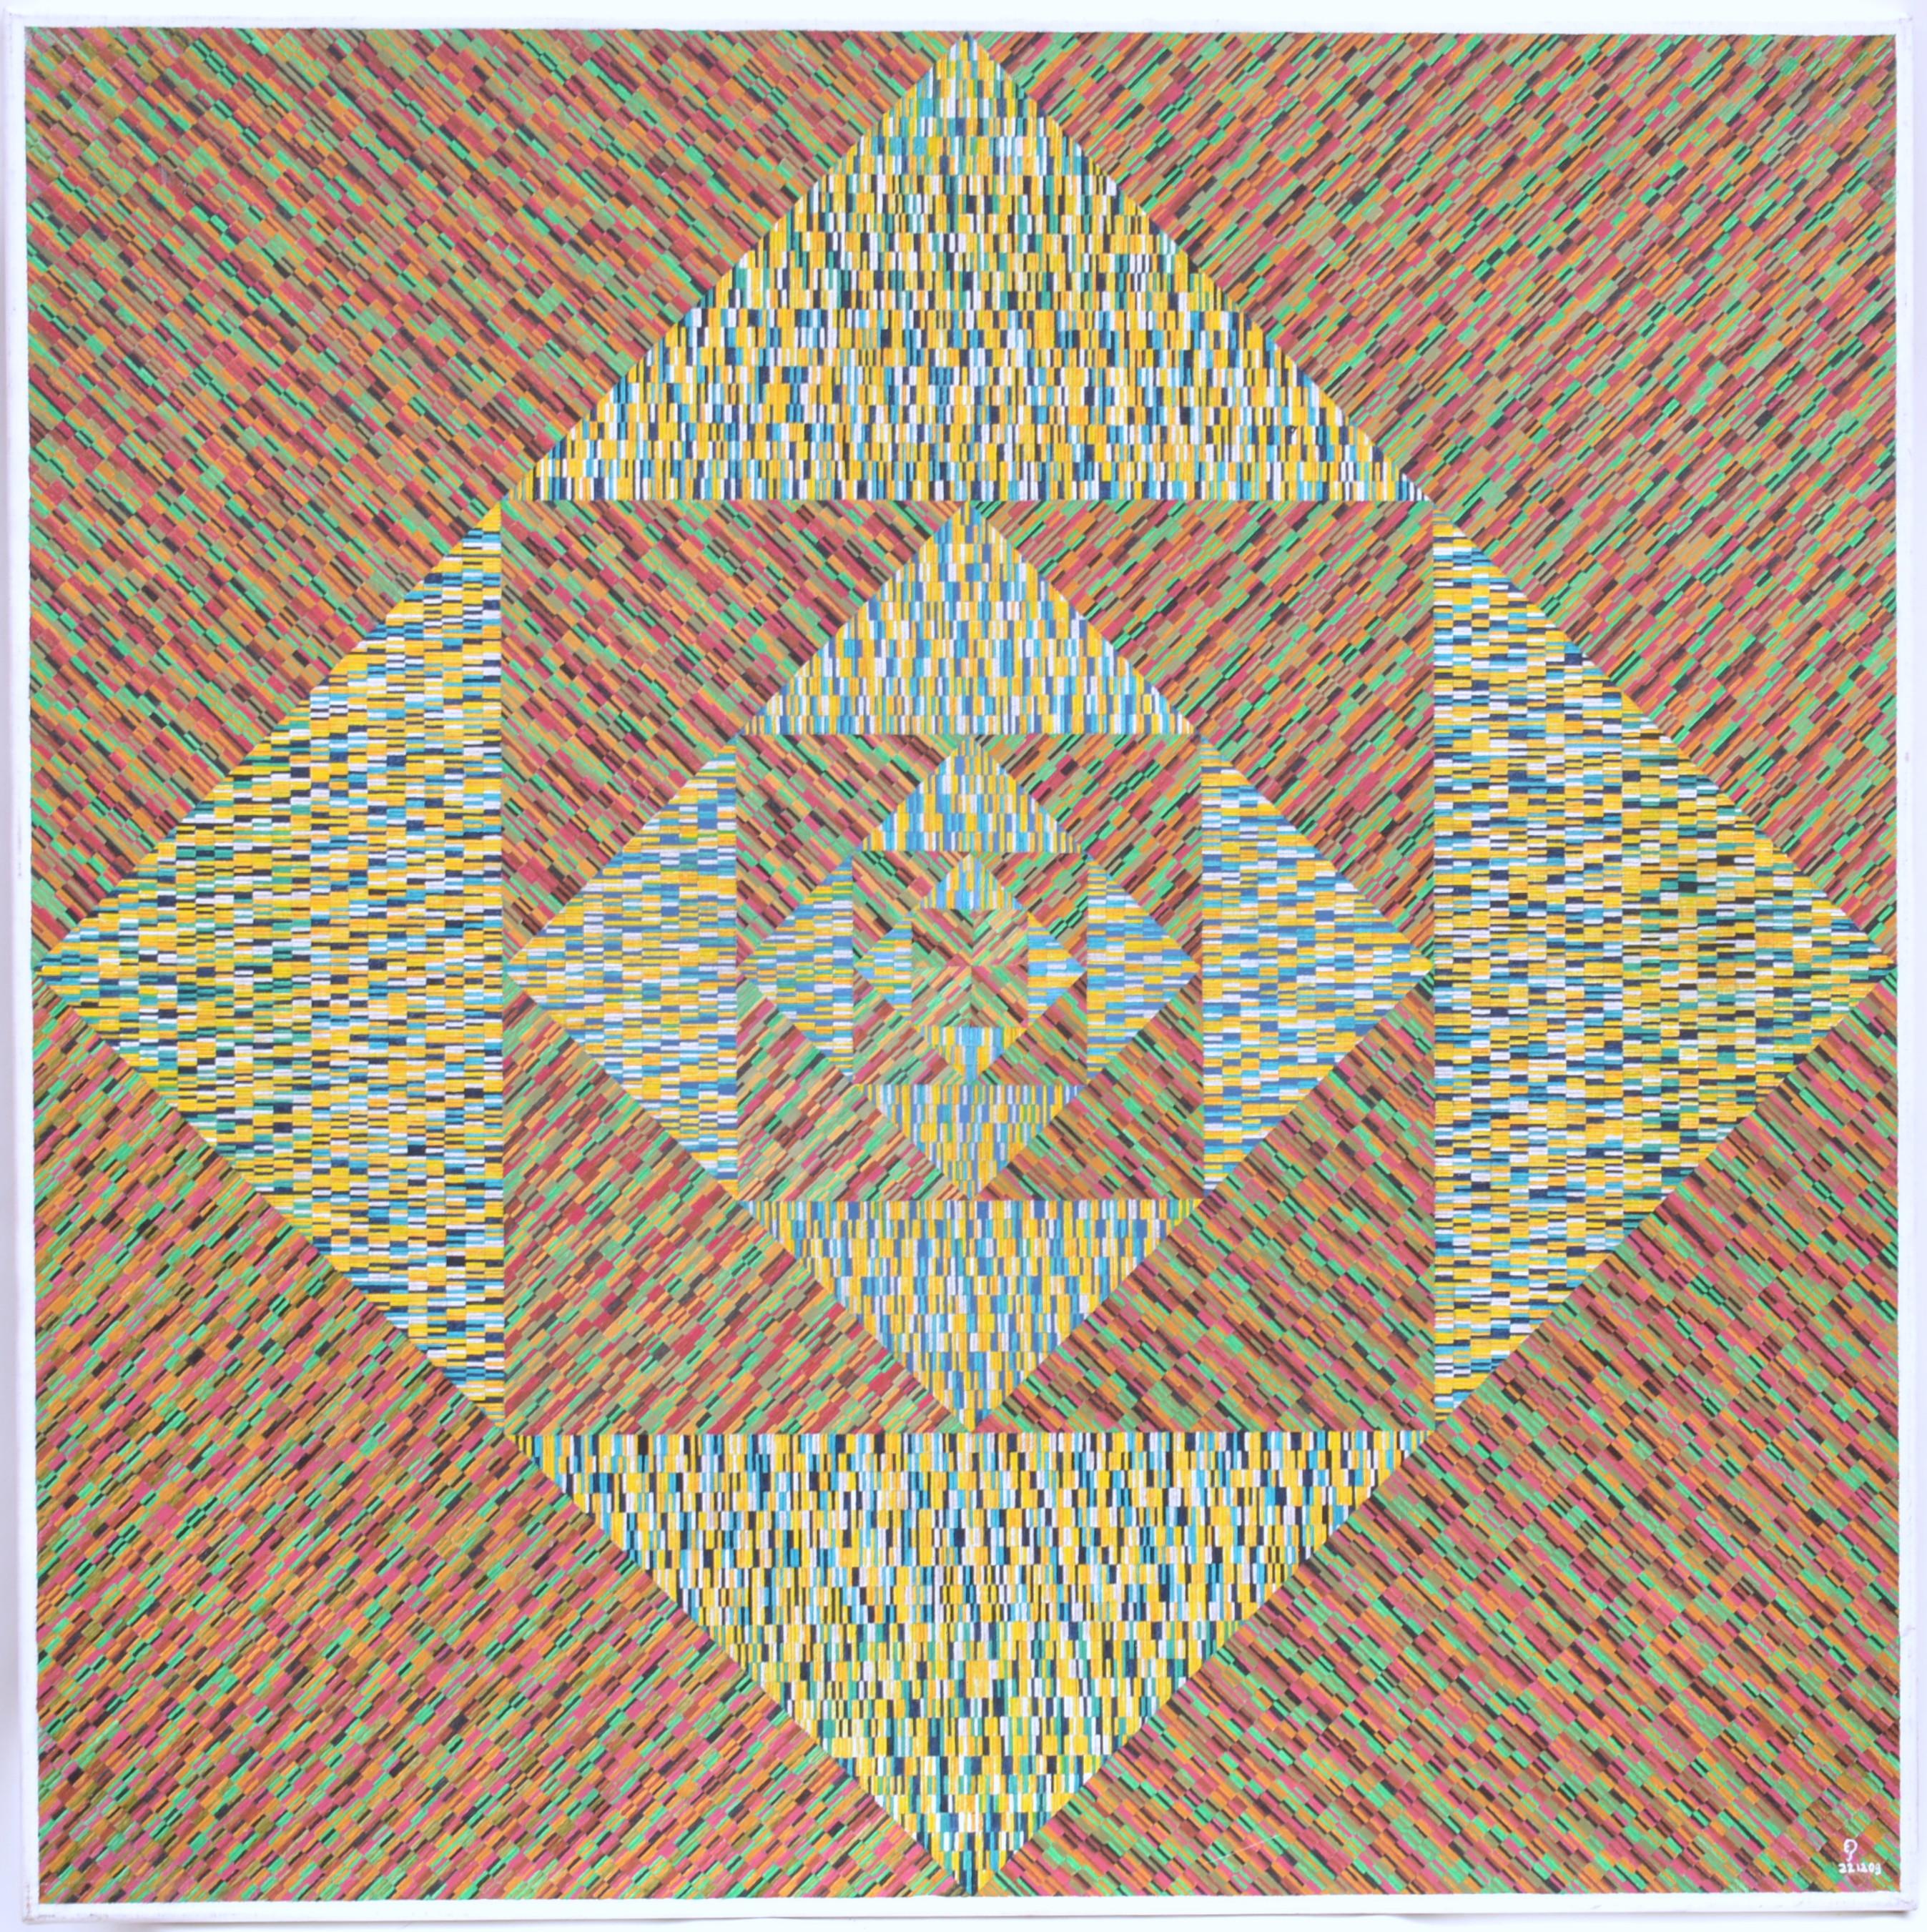 Dynamic geometric abstract painting on canvas by Dutch artist Eric Pool 2009 titled; 'T.H.E. Typical Heroic Exclusive'. The geometric pattern is like a quilt or patchwork of refined patterns that waver outwards as if they are an endless flow of